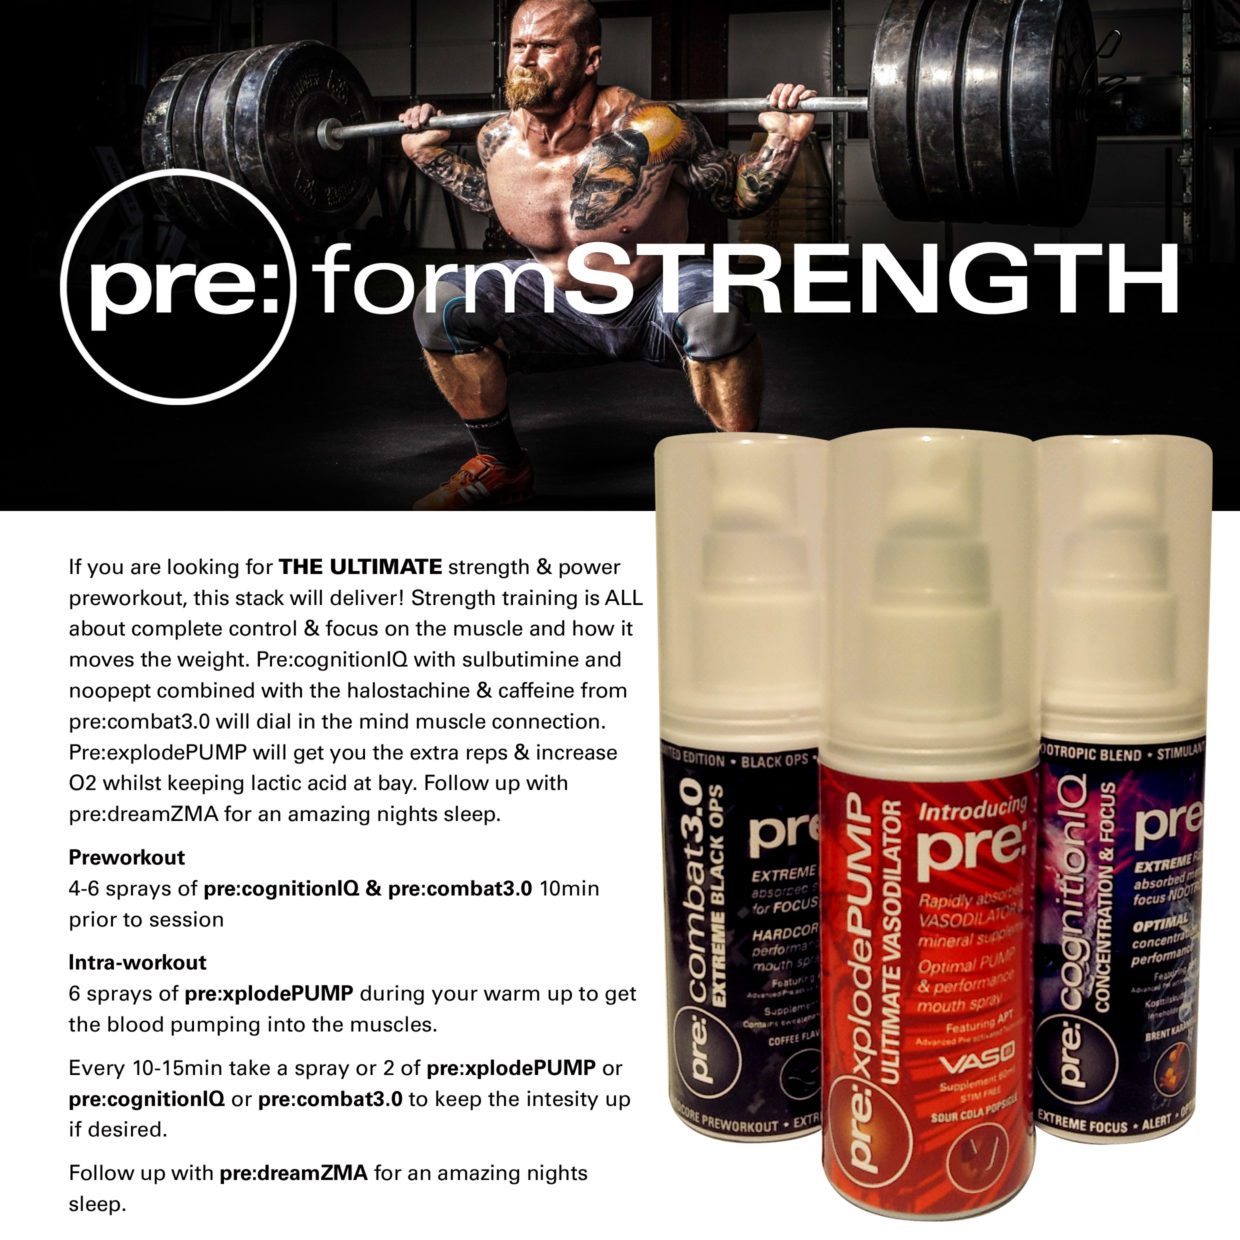 PRE:FORMSTRENGTH PACK